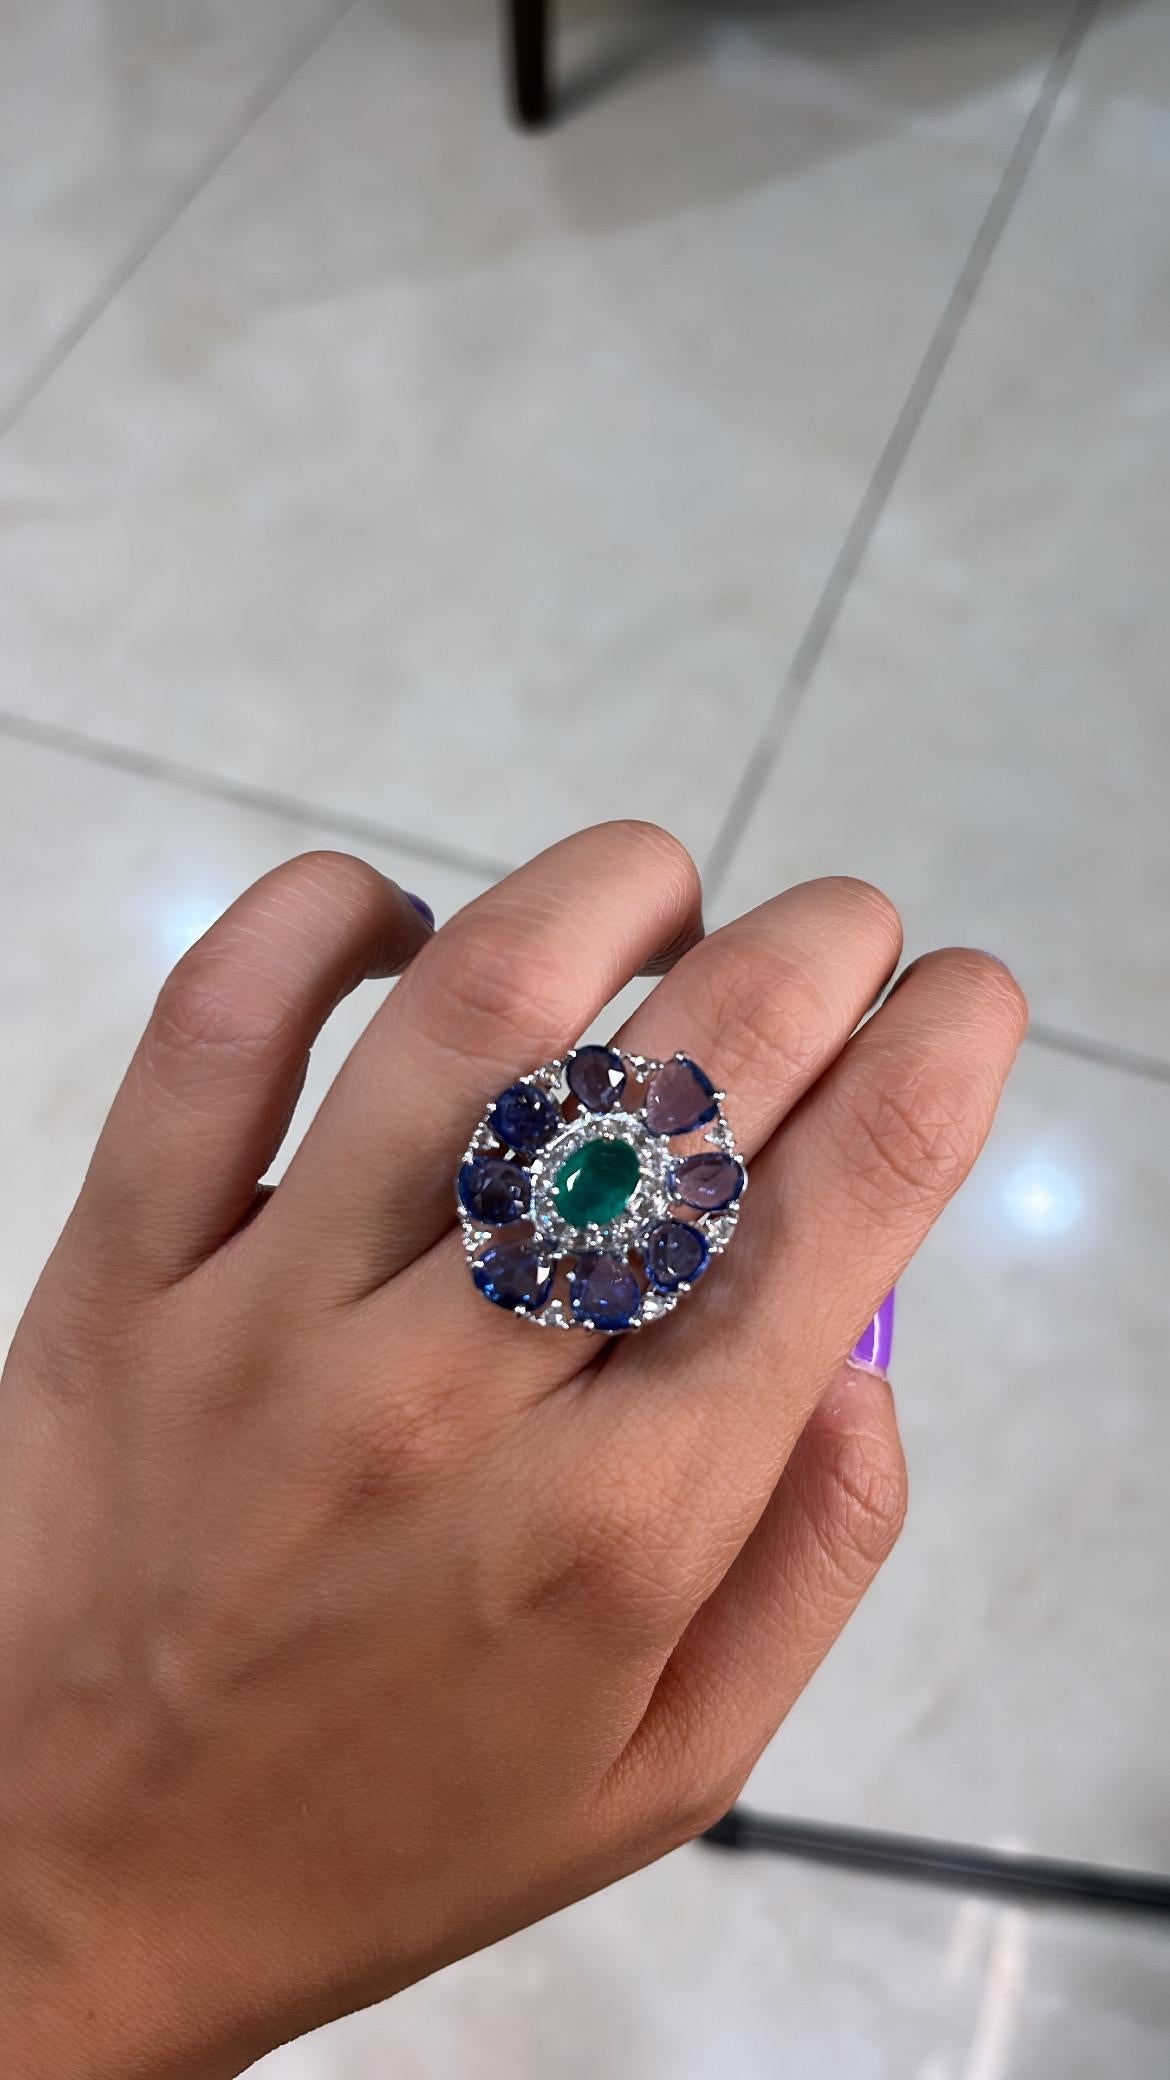 Women's or Men's Natural Blue Sapphires, Emerald & Diamonds Cocktail Ring Set in 18K White Gold